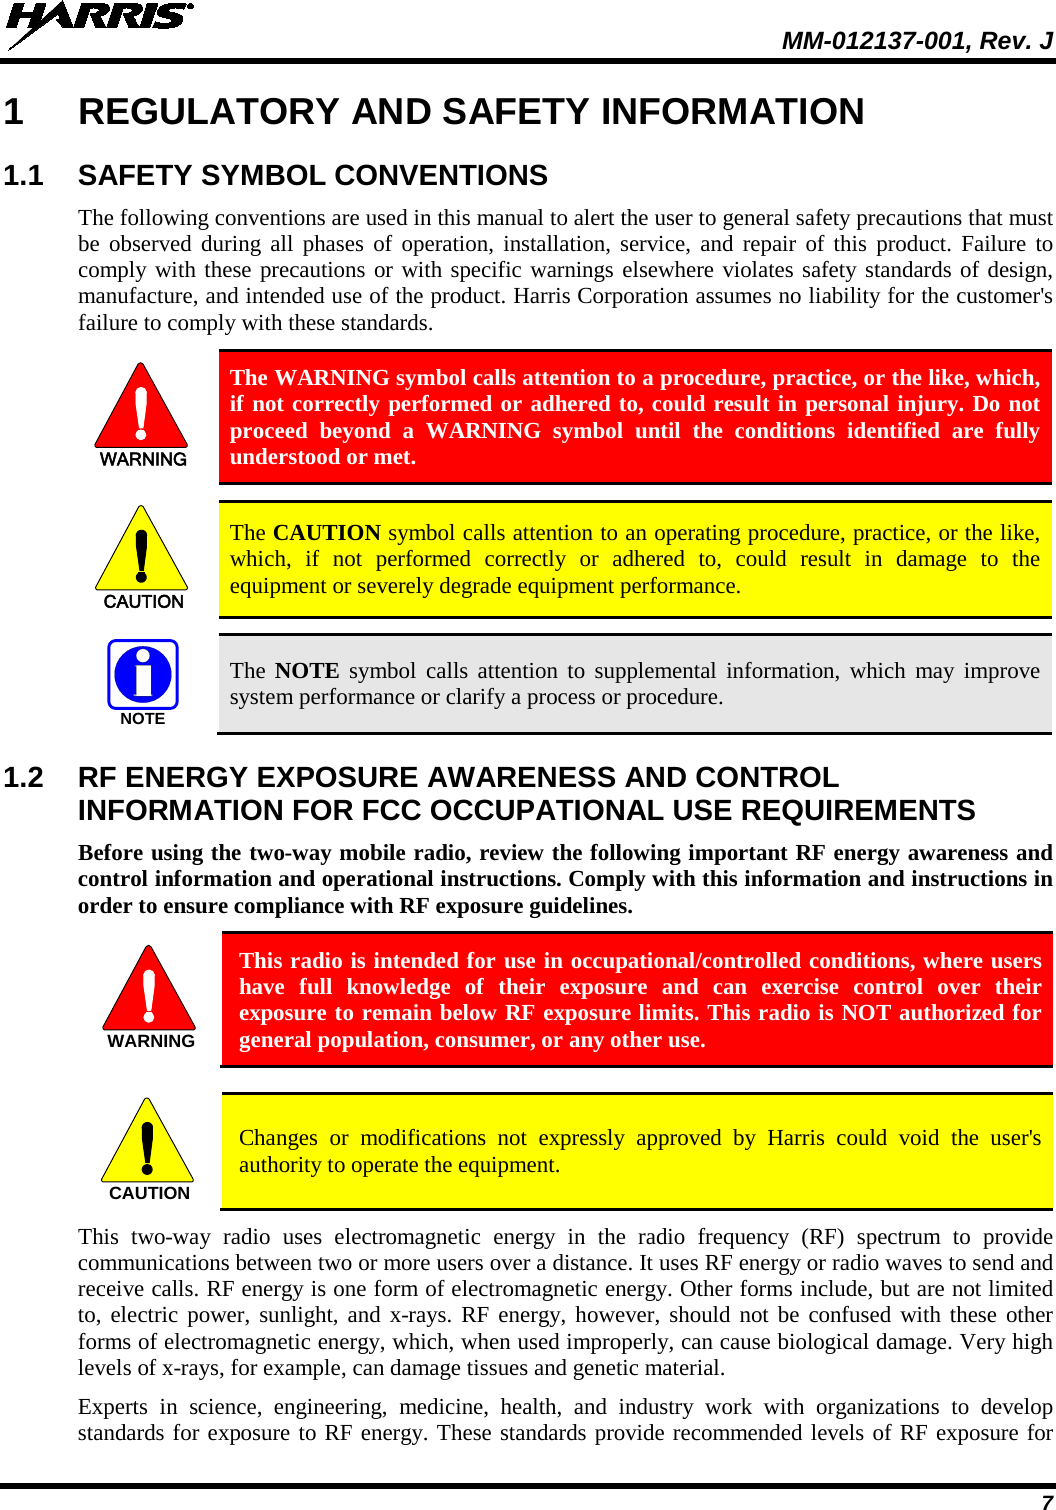  MM-012137-001, Rev. J 7 1  REGULATORY AND SAFETY INFORMATION 1.1  SAFETY SYMBOL CONVENTIONS The following conventions are used in this manual to alert the user to general safety precautions that must be observed during all phases of operation, installation, service, and repair of this product. Failure to comply with these precautions or with specific warnings elsewhere violates safety standards of design, manufacture, and intended use of the product. Harris Corporation assumes no liability for the customer&apos;s failure to comply with these standards. WARNING The WARNING symbol calls attention to a procedure, practice, or the like, which, if not correctly performed or adhered to, could result in personal injury. Do not proceed beyond a WARNING symbol until the conditions identified are fully understood or met.   CAUTION The CAUTION symbol calls attention to an operating procedure, practice, or the like, which, if not performed correctly or adhered to, could result in damage to the equipment or severely degrade equipment performance.   NOTE The NOTE symbol calls attention to supplemental information, which may improve system performance or clarify a process or procedure. 1.2  RF ENERGY EXPOSURE AWARENESS AND CONTROL INFORMATION FOR FCC OCCUPATIONAL USE REQUIREMENTS Before using the two-way mobile radio, review the following important RF energy awareness and control information and operational instructions. Comply with this information and instructions in order to ensure compliance with RF exposure guidelines.  This radio is intended for use in occupational/controlled conditions, where users have full knowledge of their exposure and can exercise control over their exposure to remain below RF exposure limits. This radio is NOT authorized for general population, consumer, or any other use.   Changes or modifications not expressly approved by Harris could void the user&apos;s authority to operate the equipment. This two-way radio uses electromagnetic energy in the radio frequency (RF) spectrum to provide communications between two or more users over a distance. It uses RF energy or radio waves to send and receive calls. RF energy is one form of electromagnetic energy. Other forms include, but are not limited to, electric power, sunlight, and x-rays. RF energy, however, should not be confused with these other forms of electromagnetic energy, which, when used improperly, can cause biological damage. Very high levels of x-rays, for example, can damage tissues and genetic material. Experts in science, engineering, medicine, health, and industry work with organizations to develop standards for exposure to RF energy. These standards provide recommended levels of RF exposure for WARNINGCAUTION